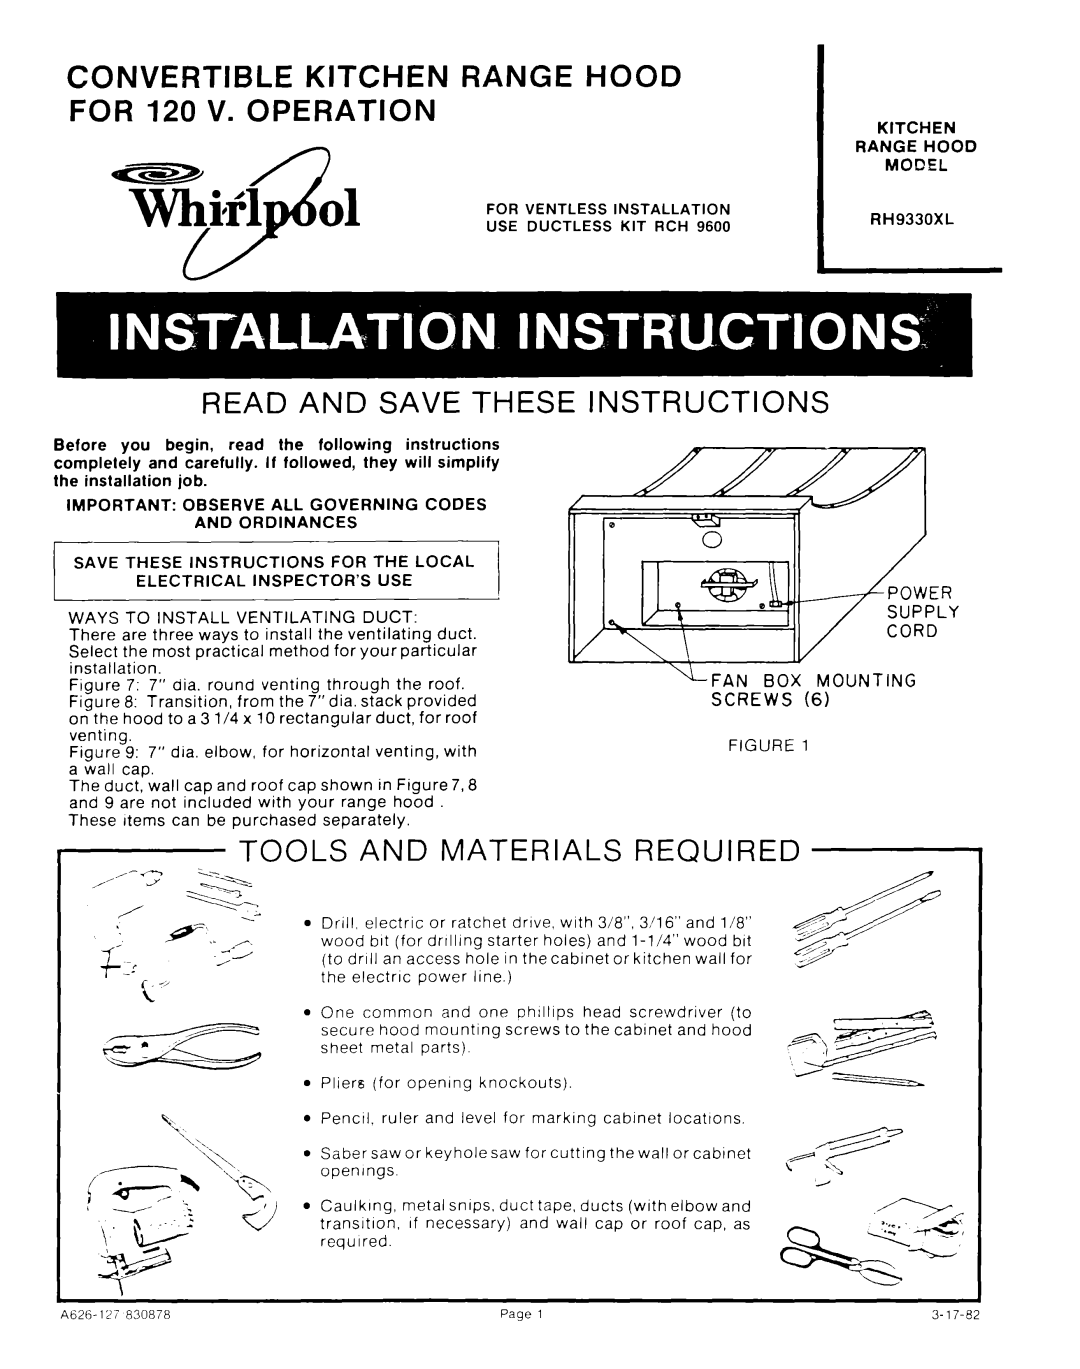 Whirlpool RH9330XL manual CONVERTIBLE KITCHEN RANGE HOOD FOR 120 V. OPERATION, Read And Save These, Instructions 